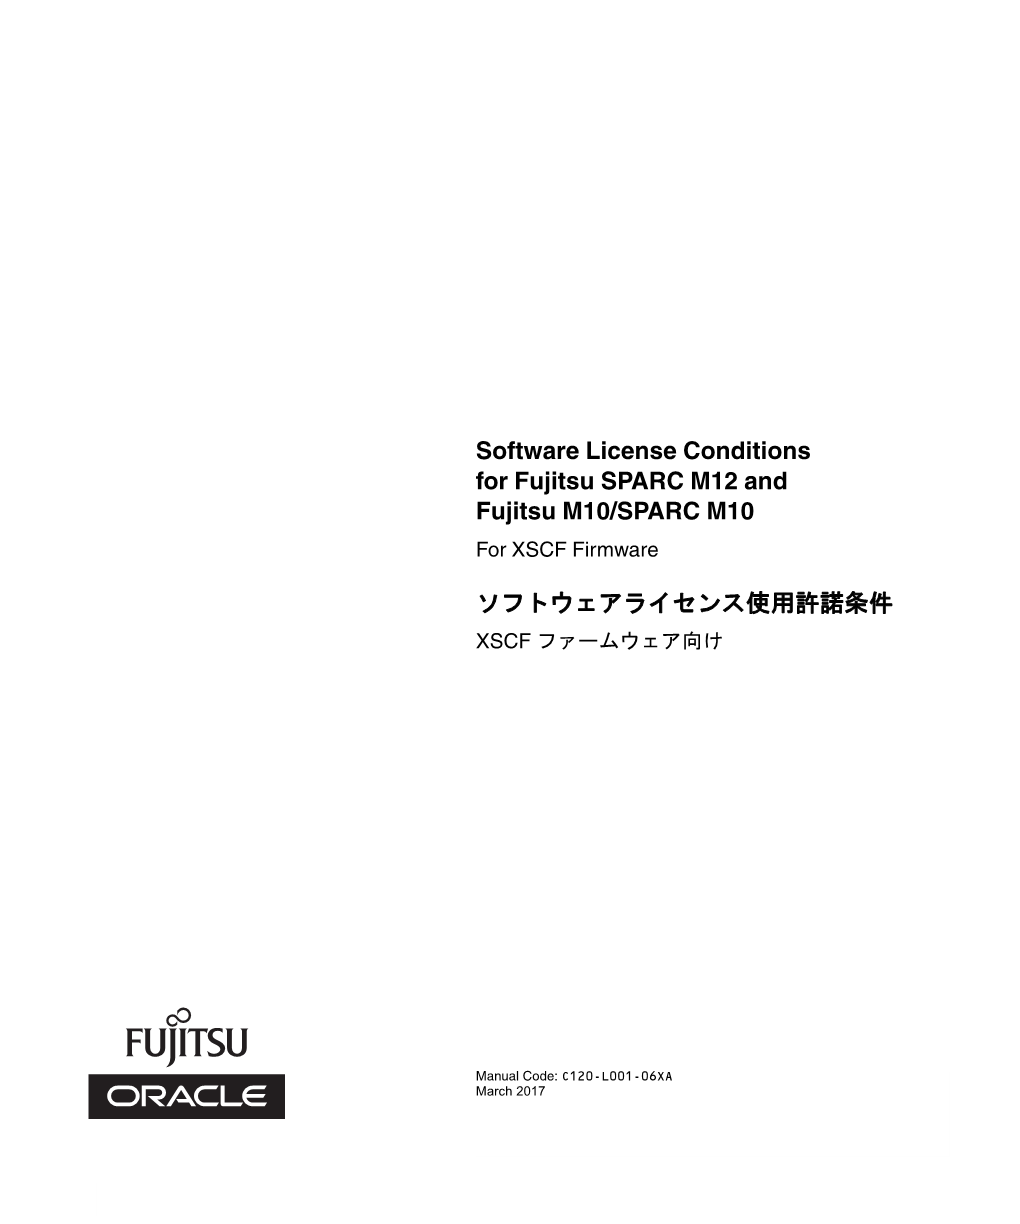 Software License Conditions for Fujitsu SPARC M12 and Fujitsu M10/SPARC M10 for XSCF Firmware